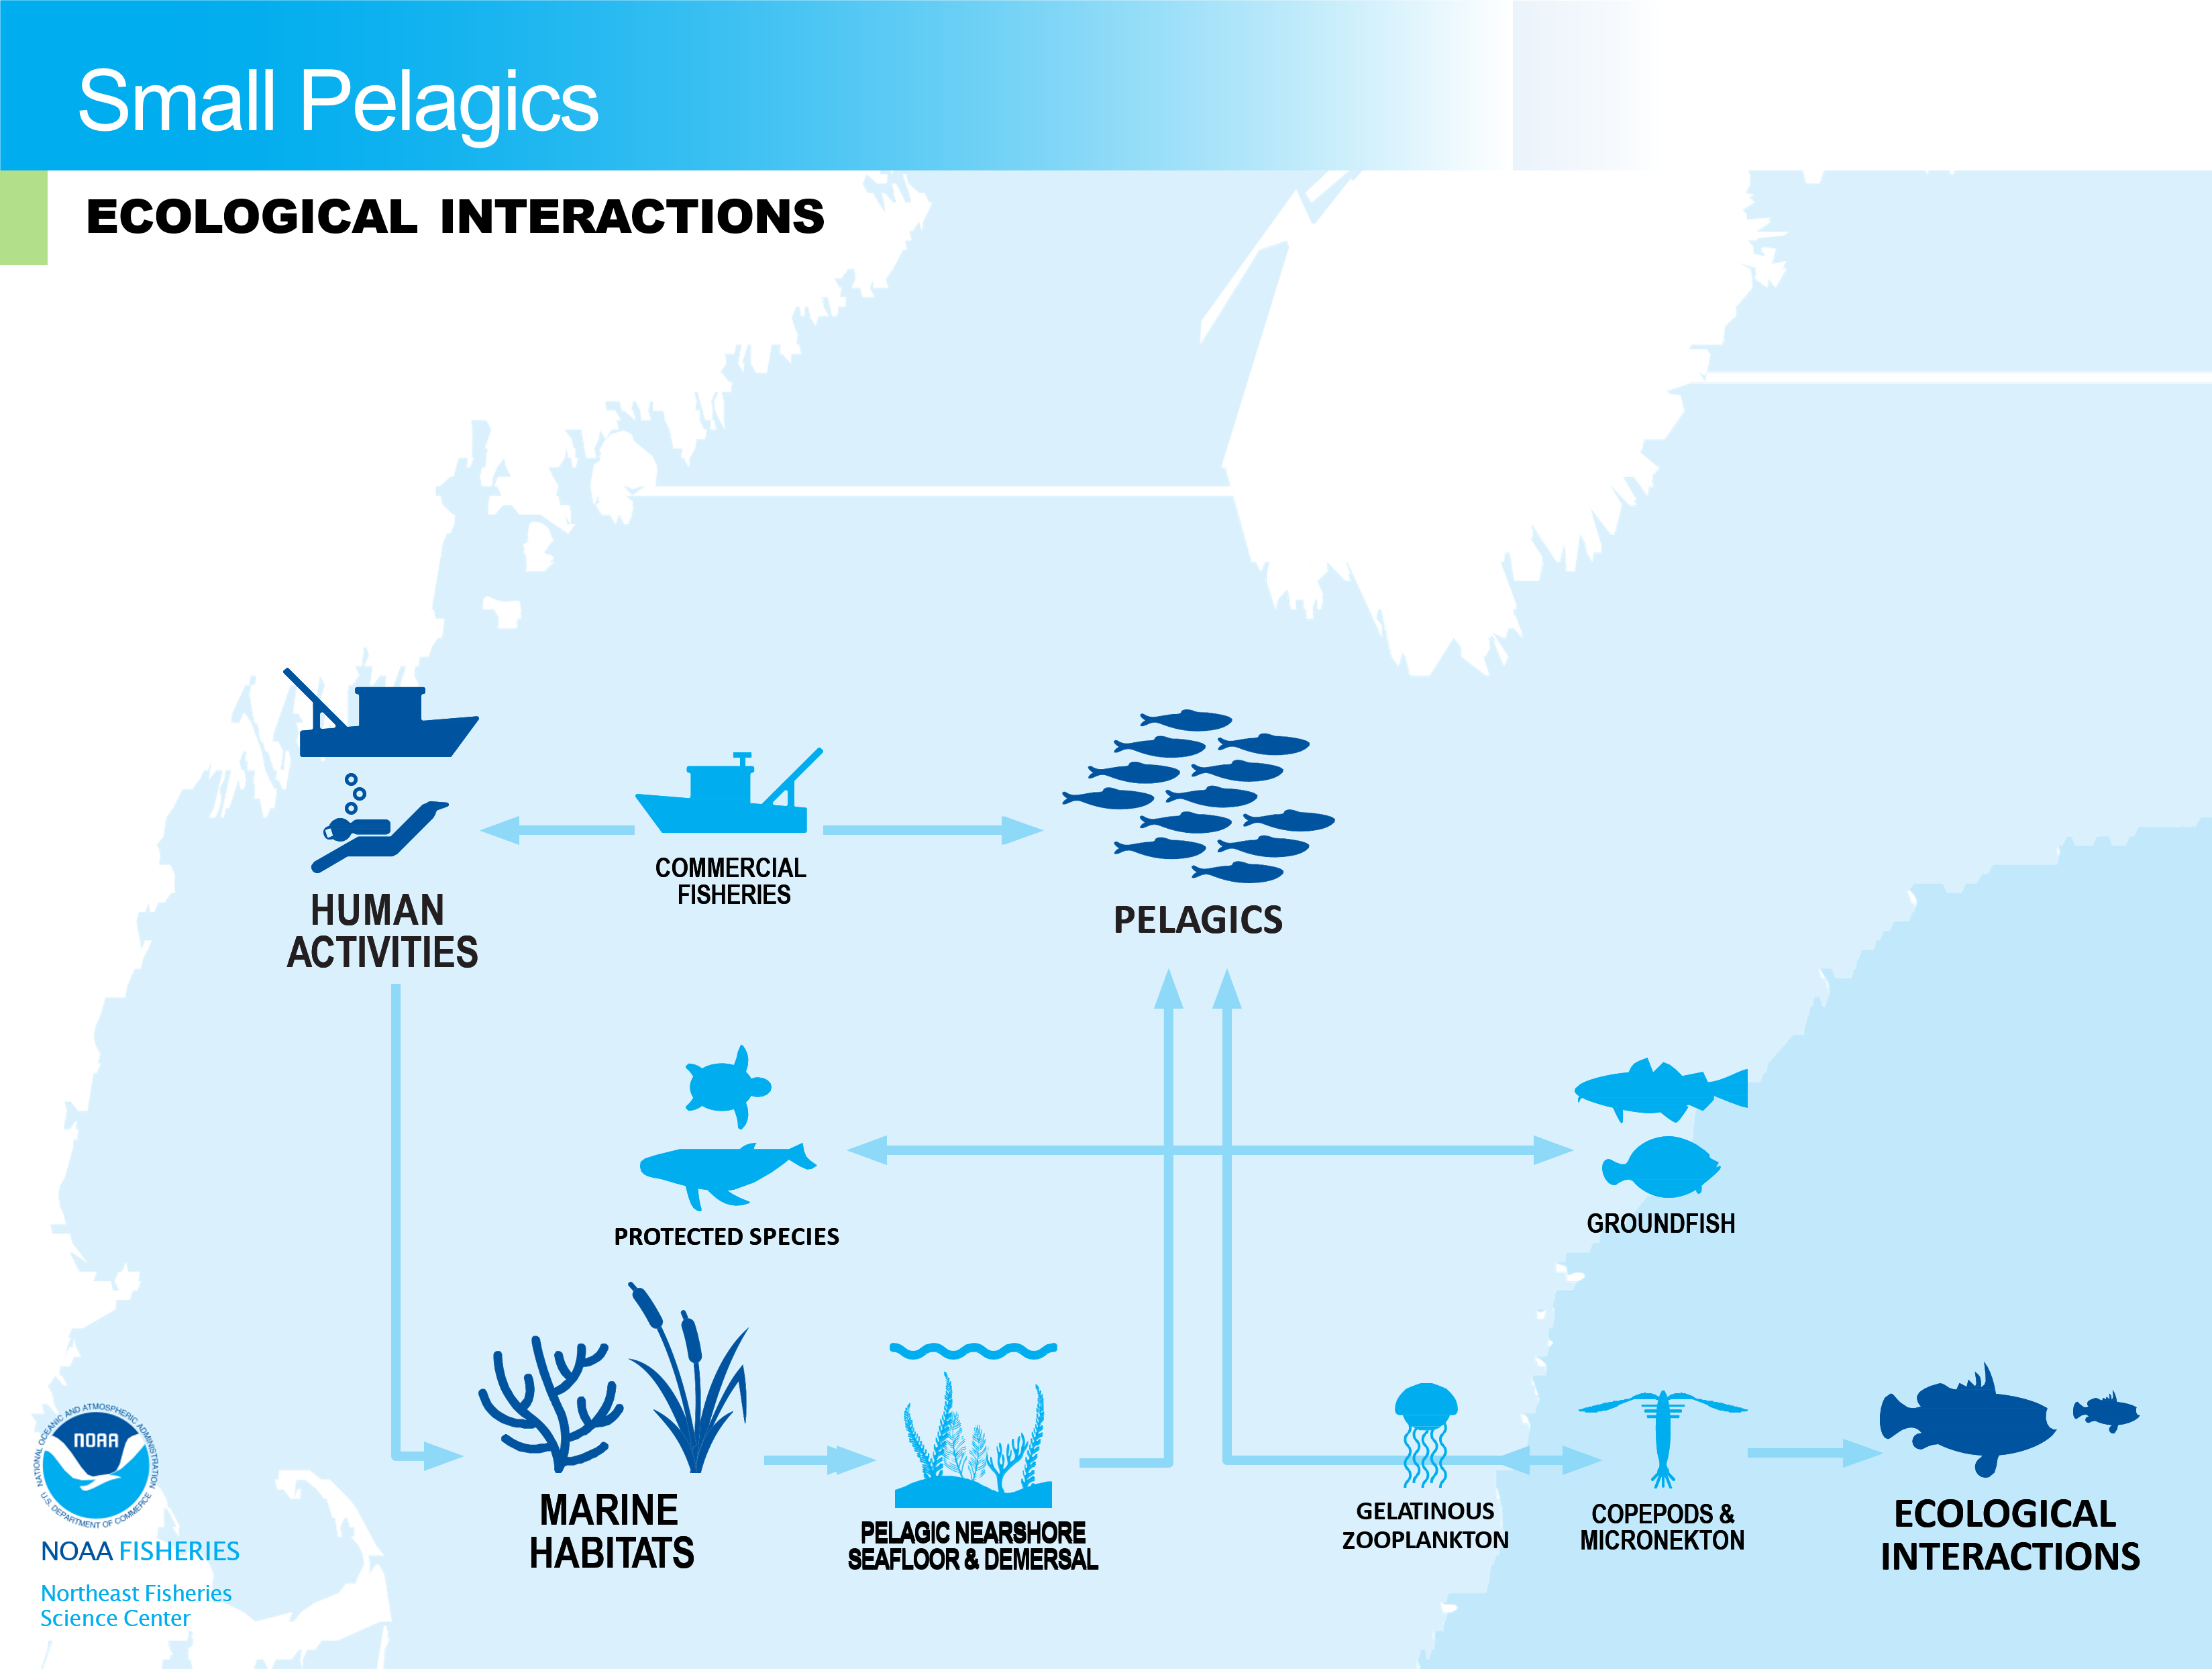 Conceptual model of small pelagics ecological interactions in the NE-LME.